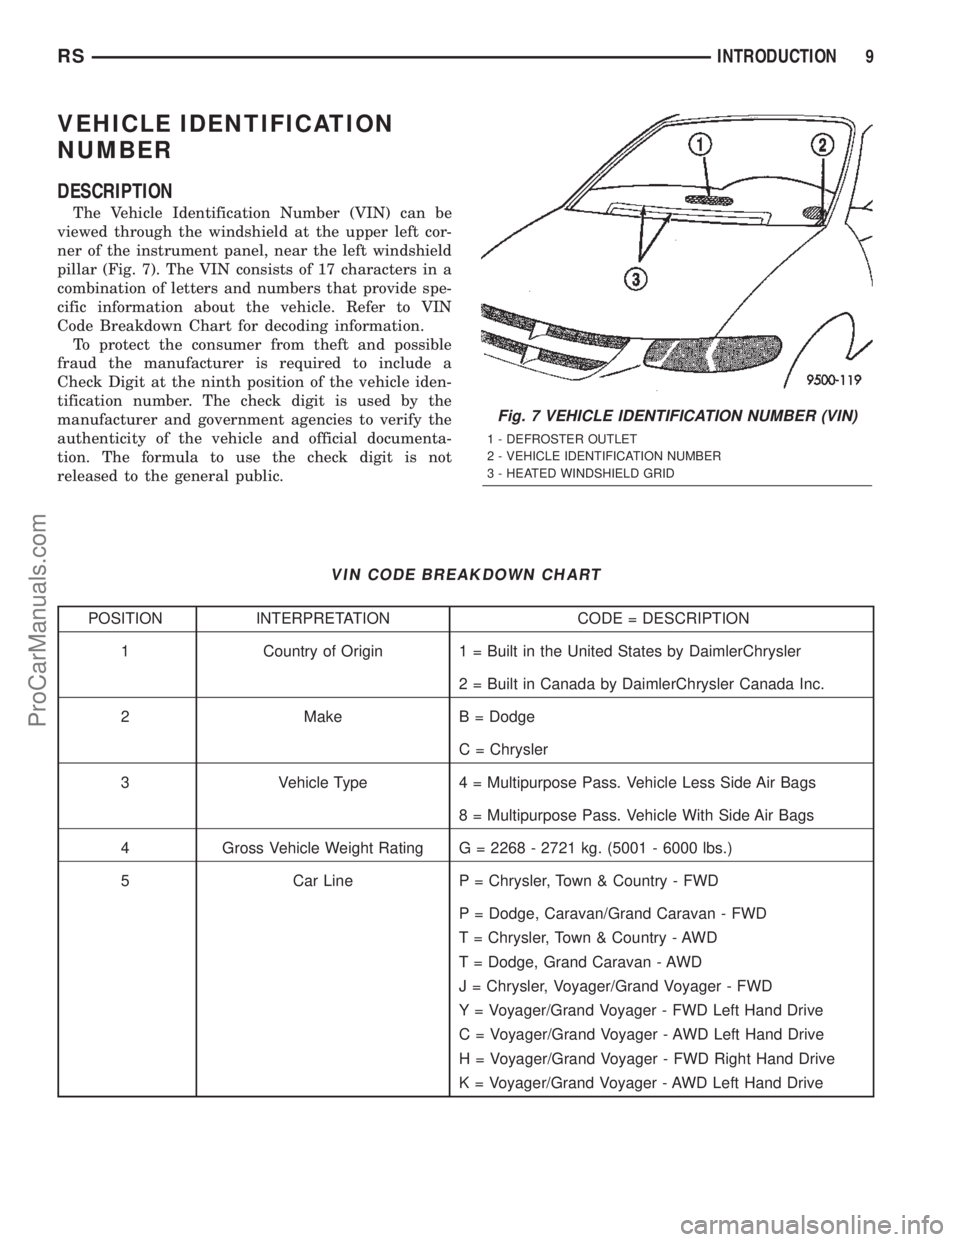 DODGE TOWN AND COUNTRY 2002  Service Manual VEHICLE IDENTIFICATION
NUMBER
DESCRIPTION
The Vehicle Identification Number (VIN) can be
viewed through the windshield at the upper left cor-
ner of the instrument panel, near the left windshield
pill